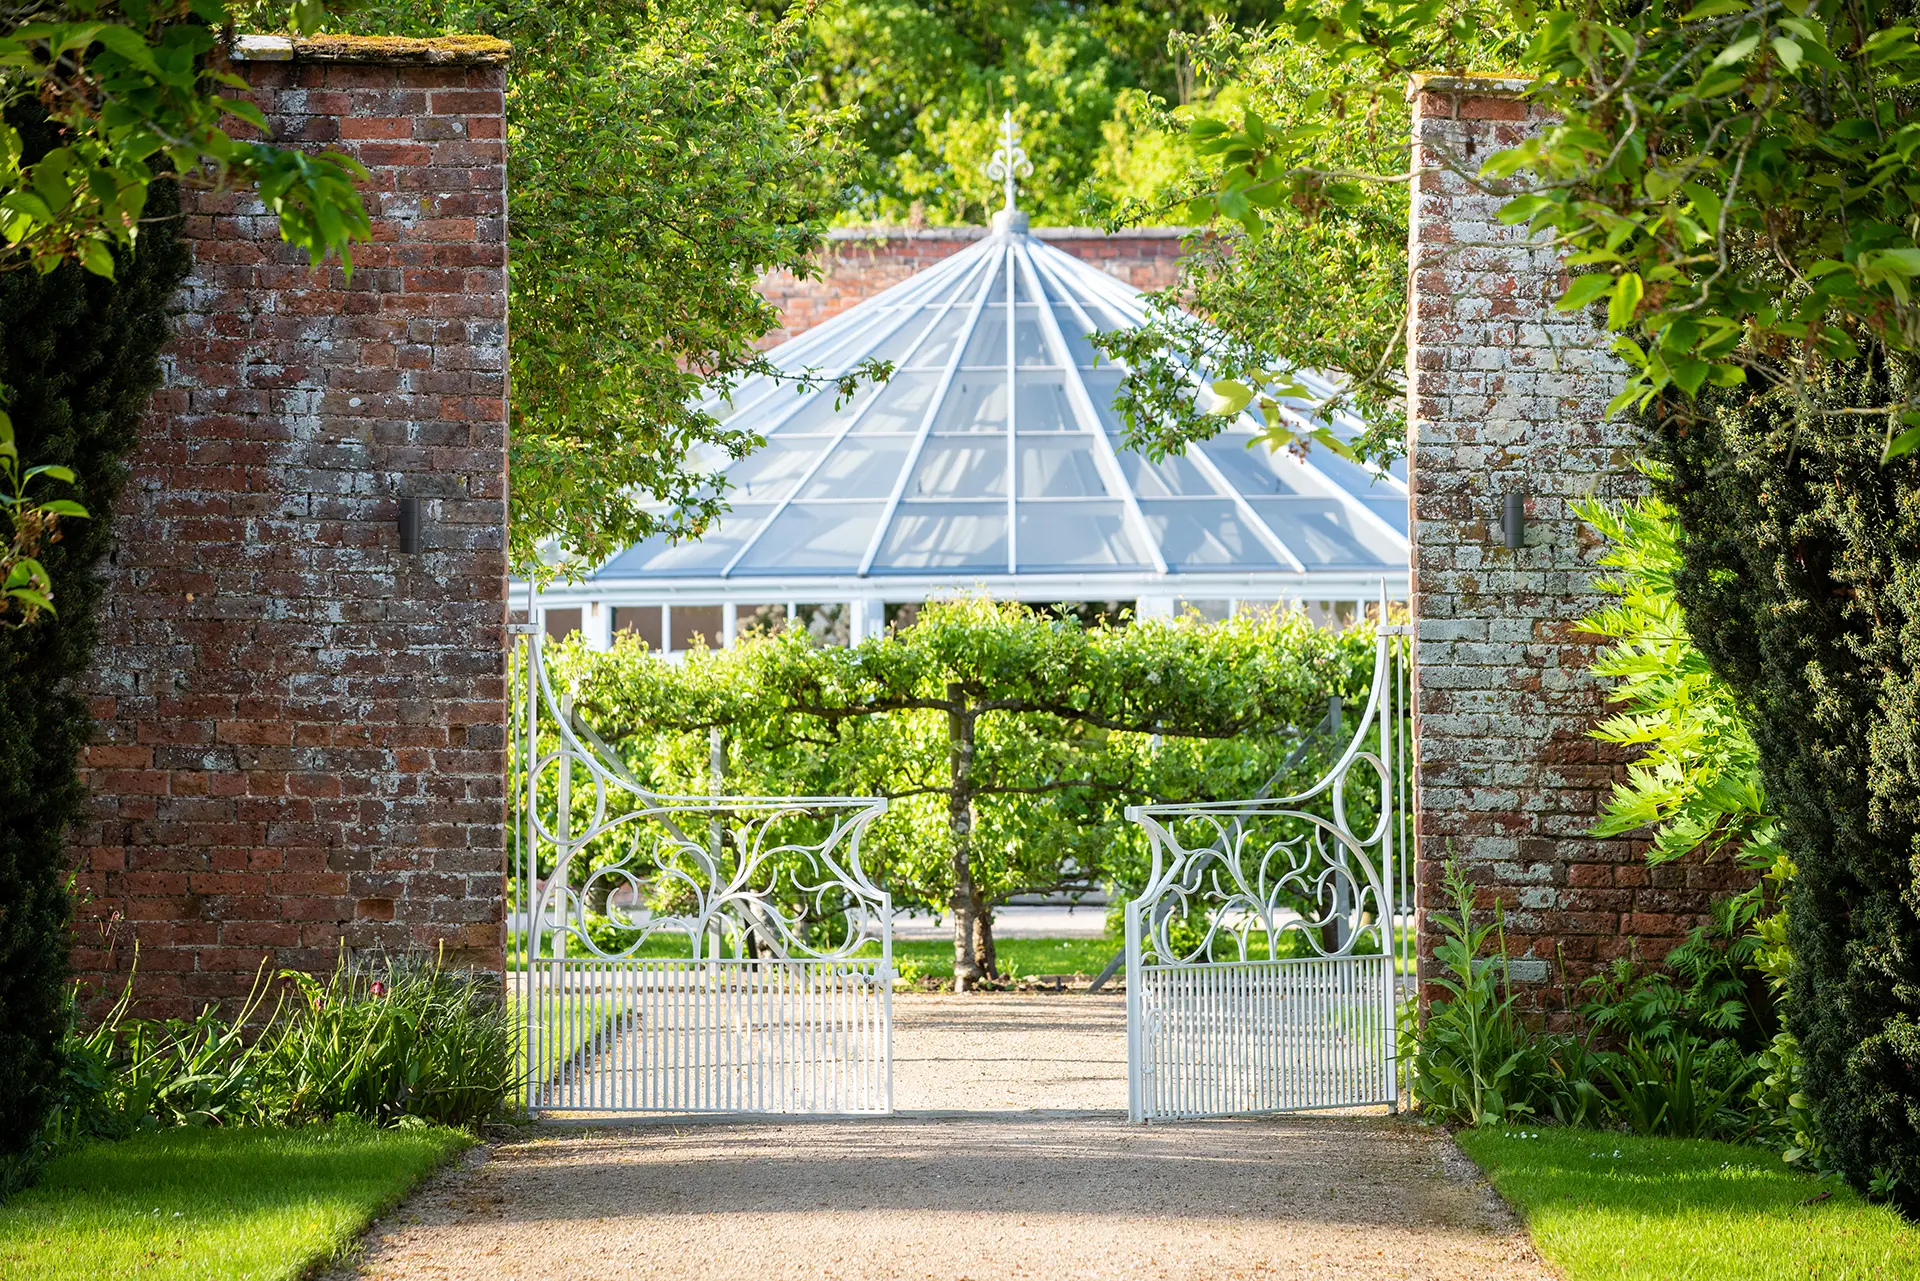 combermere abbey gardens the glass house gates